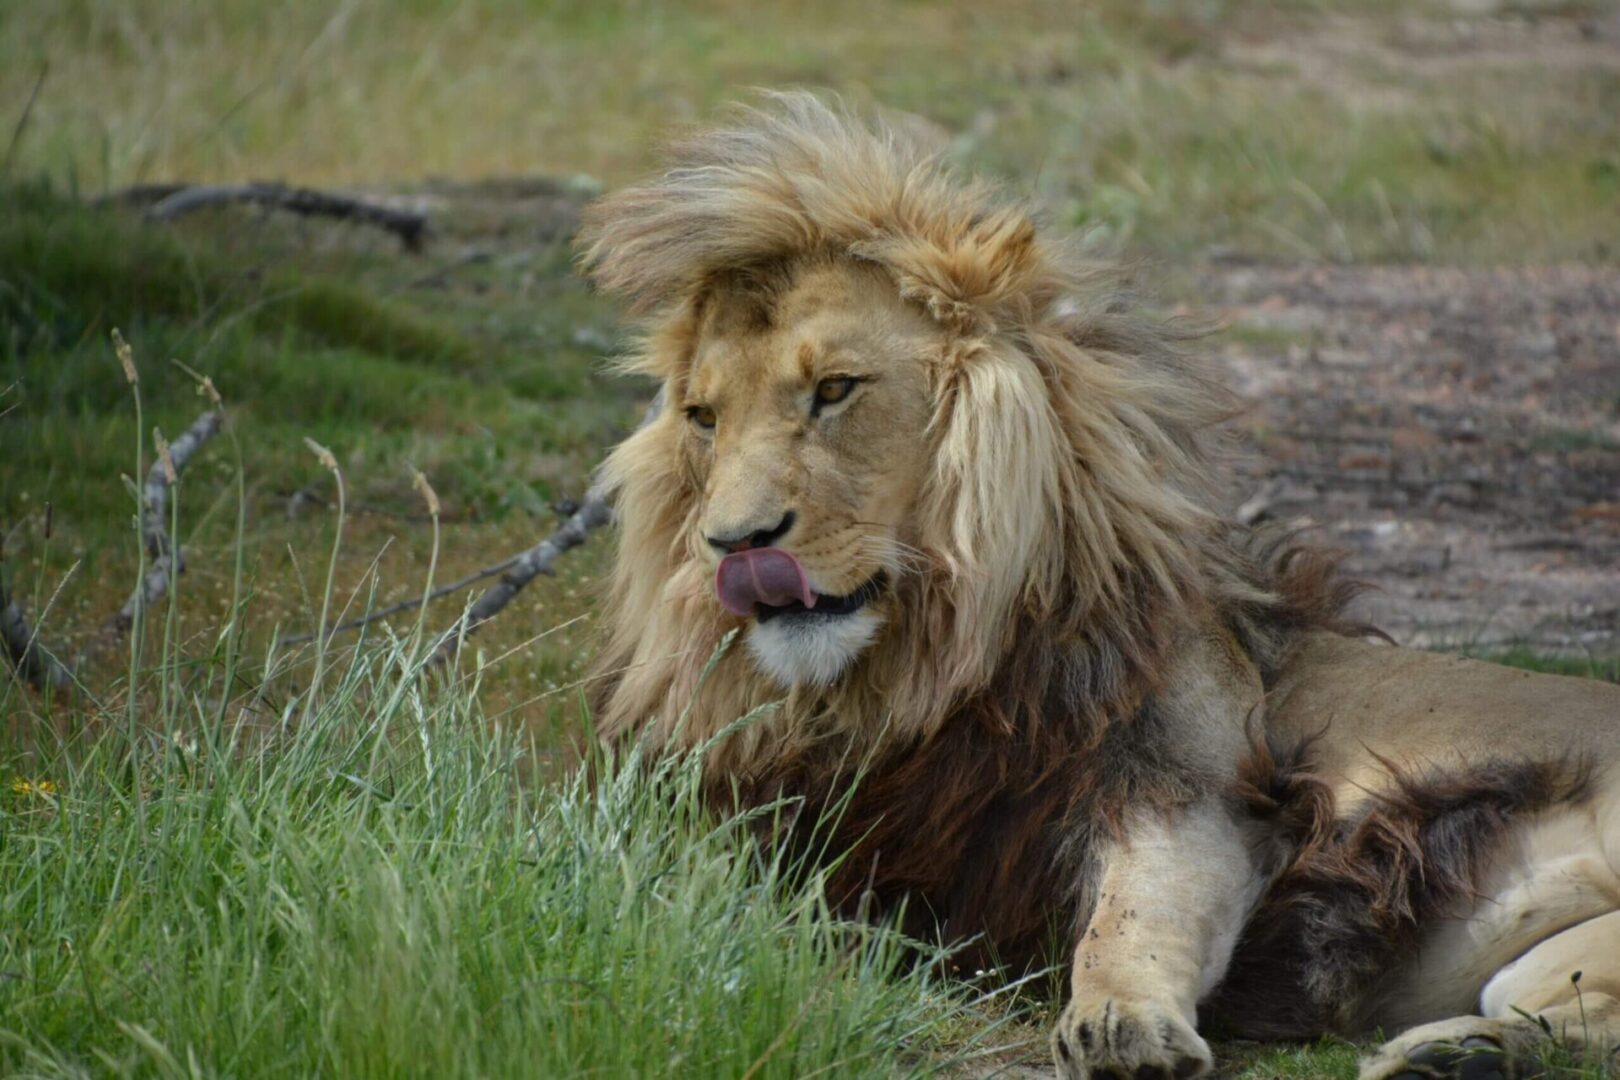 A lion laying in the grass with its tongue hanging out.